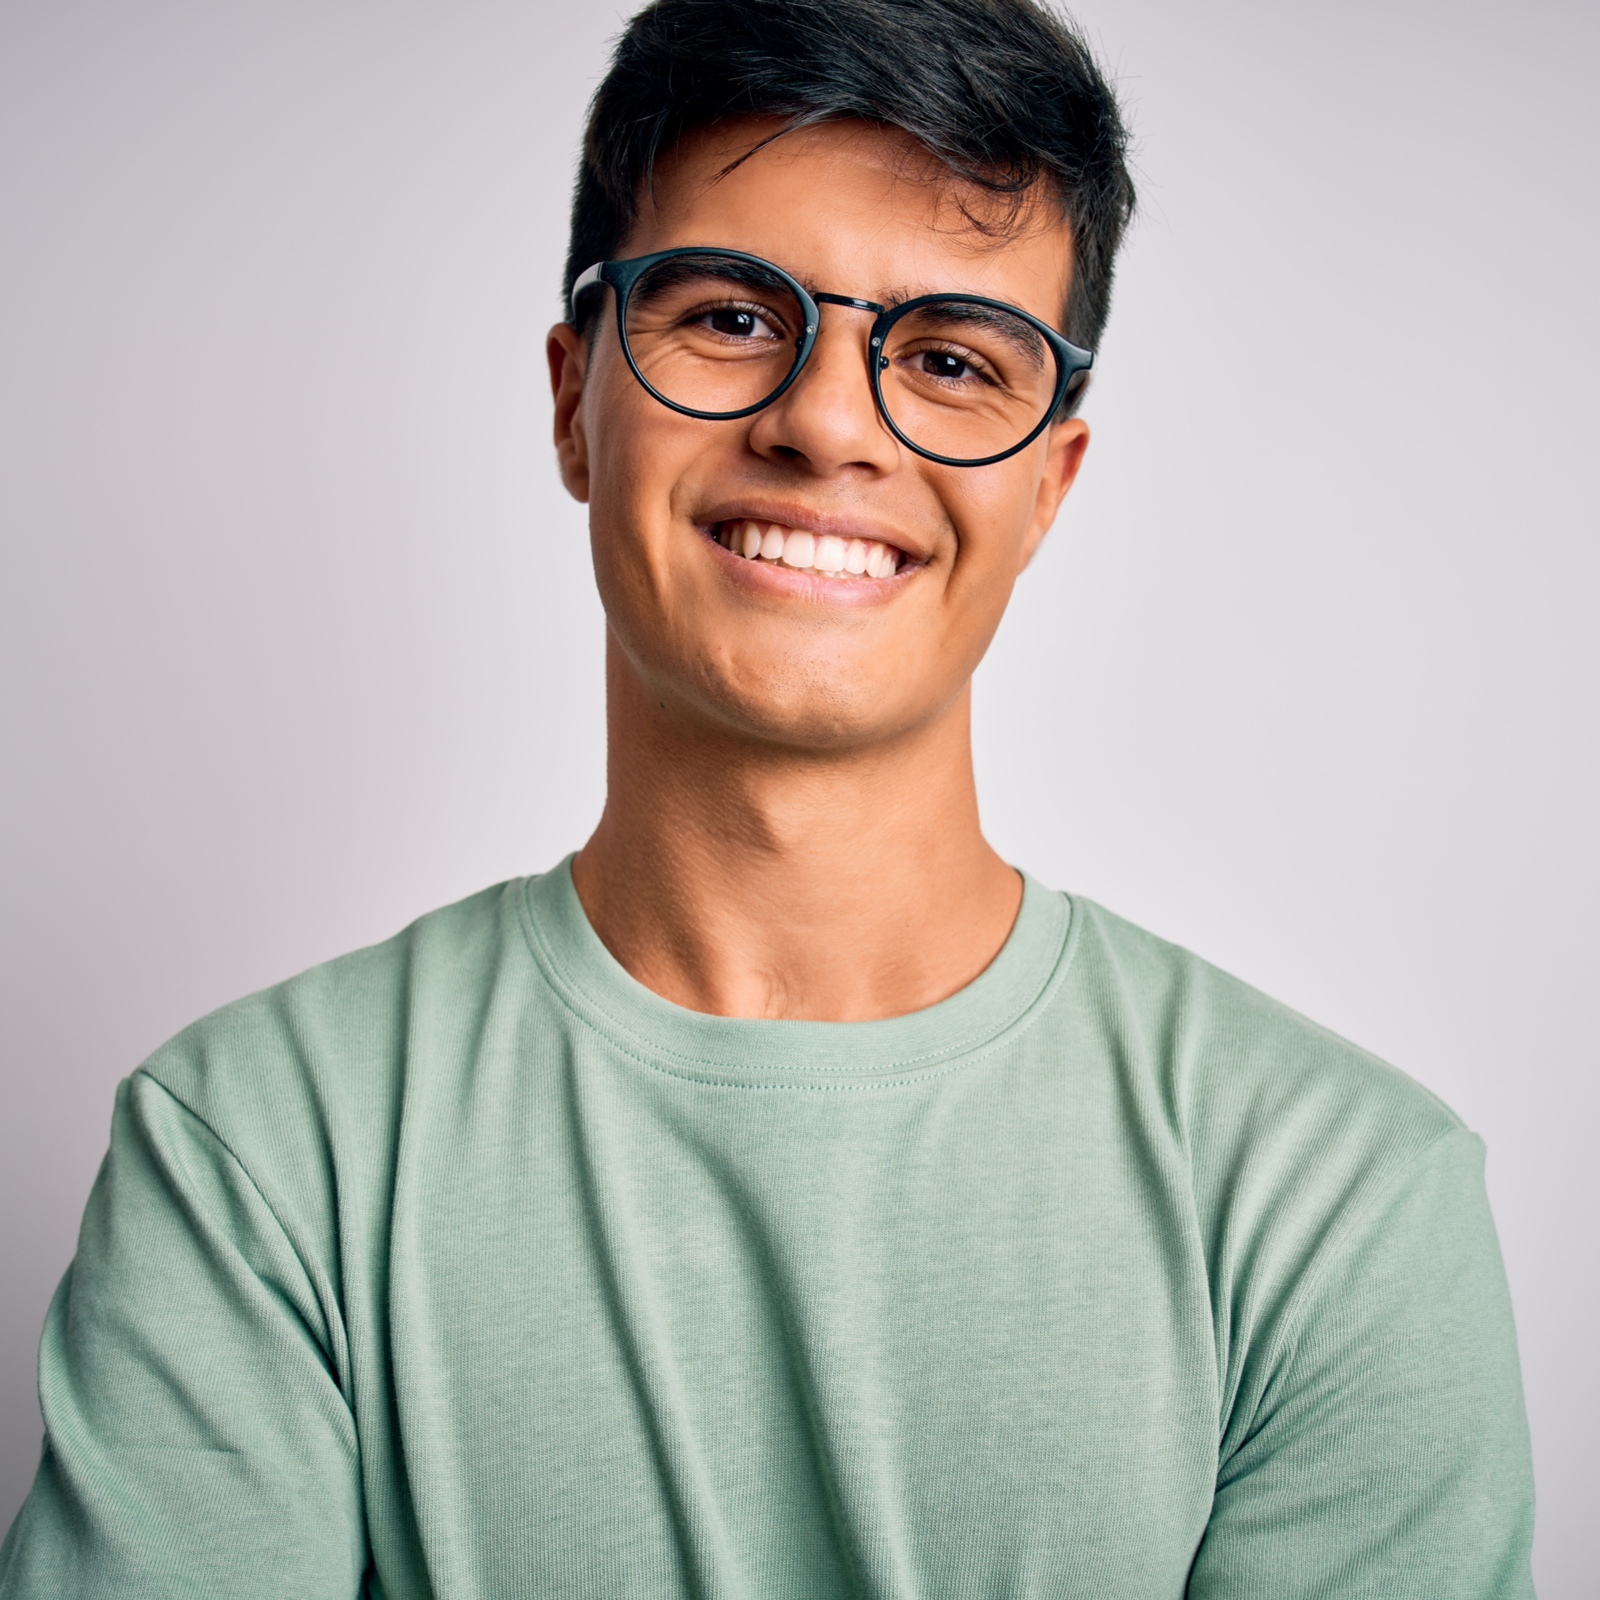 Portrait of a young men wearing glasses